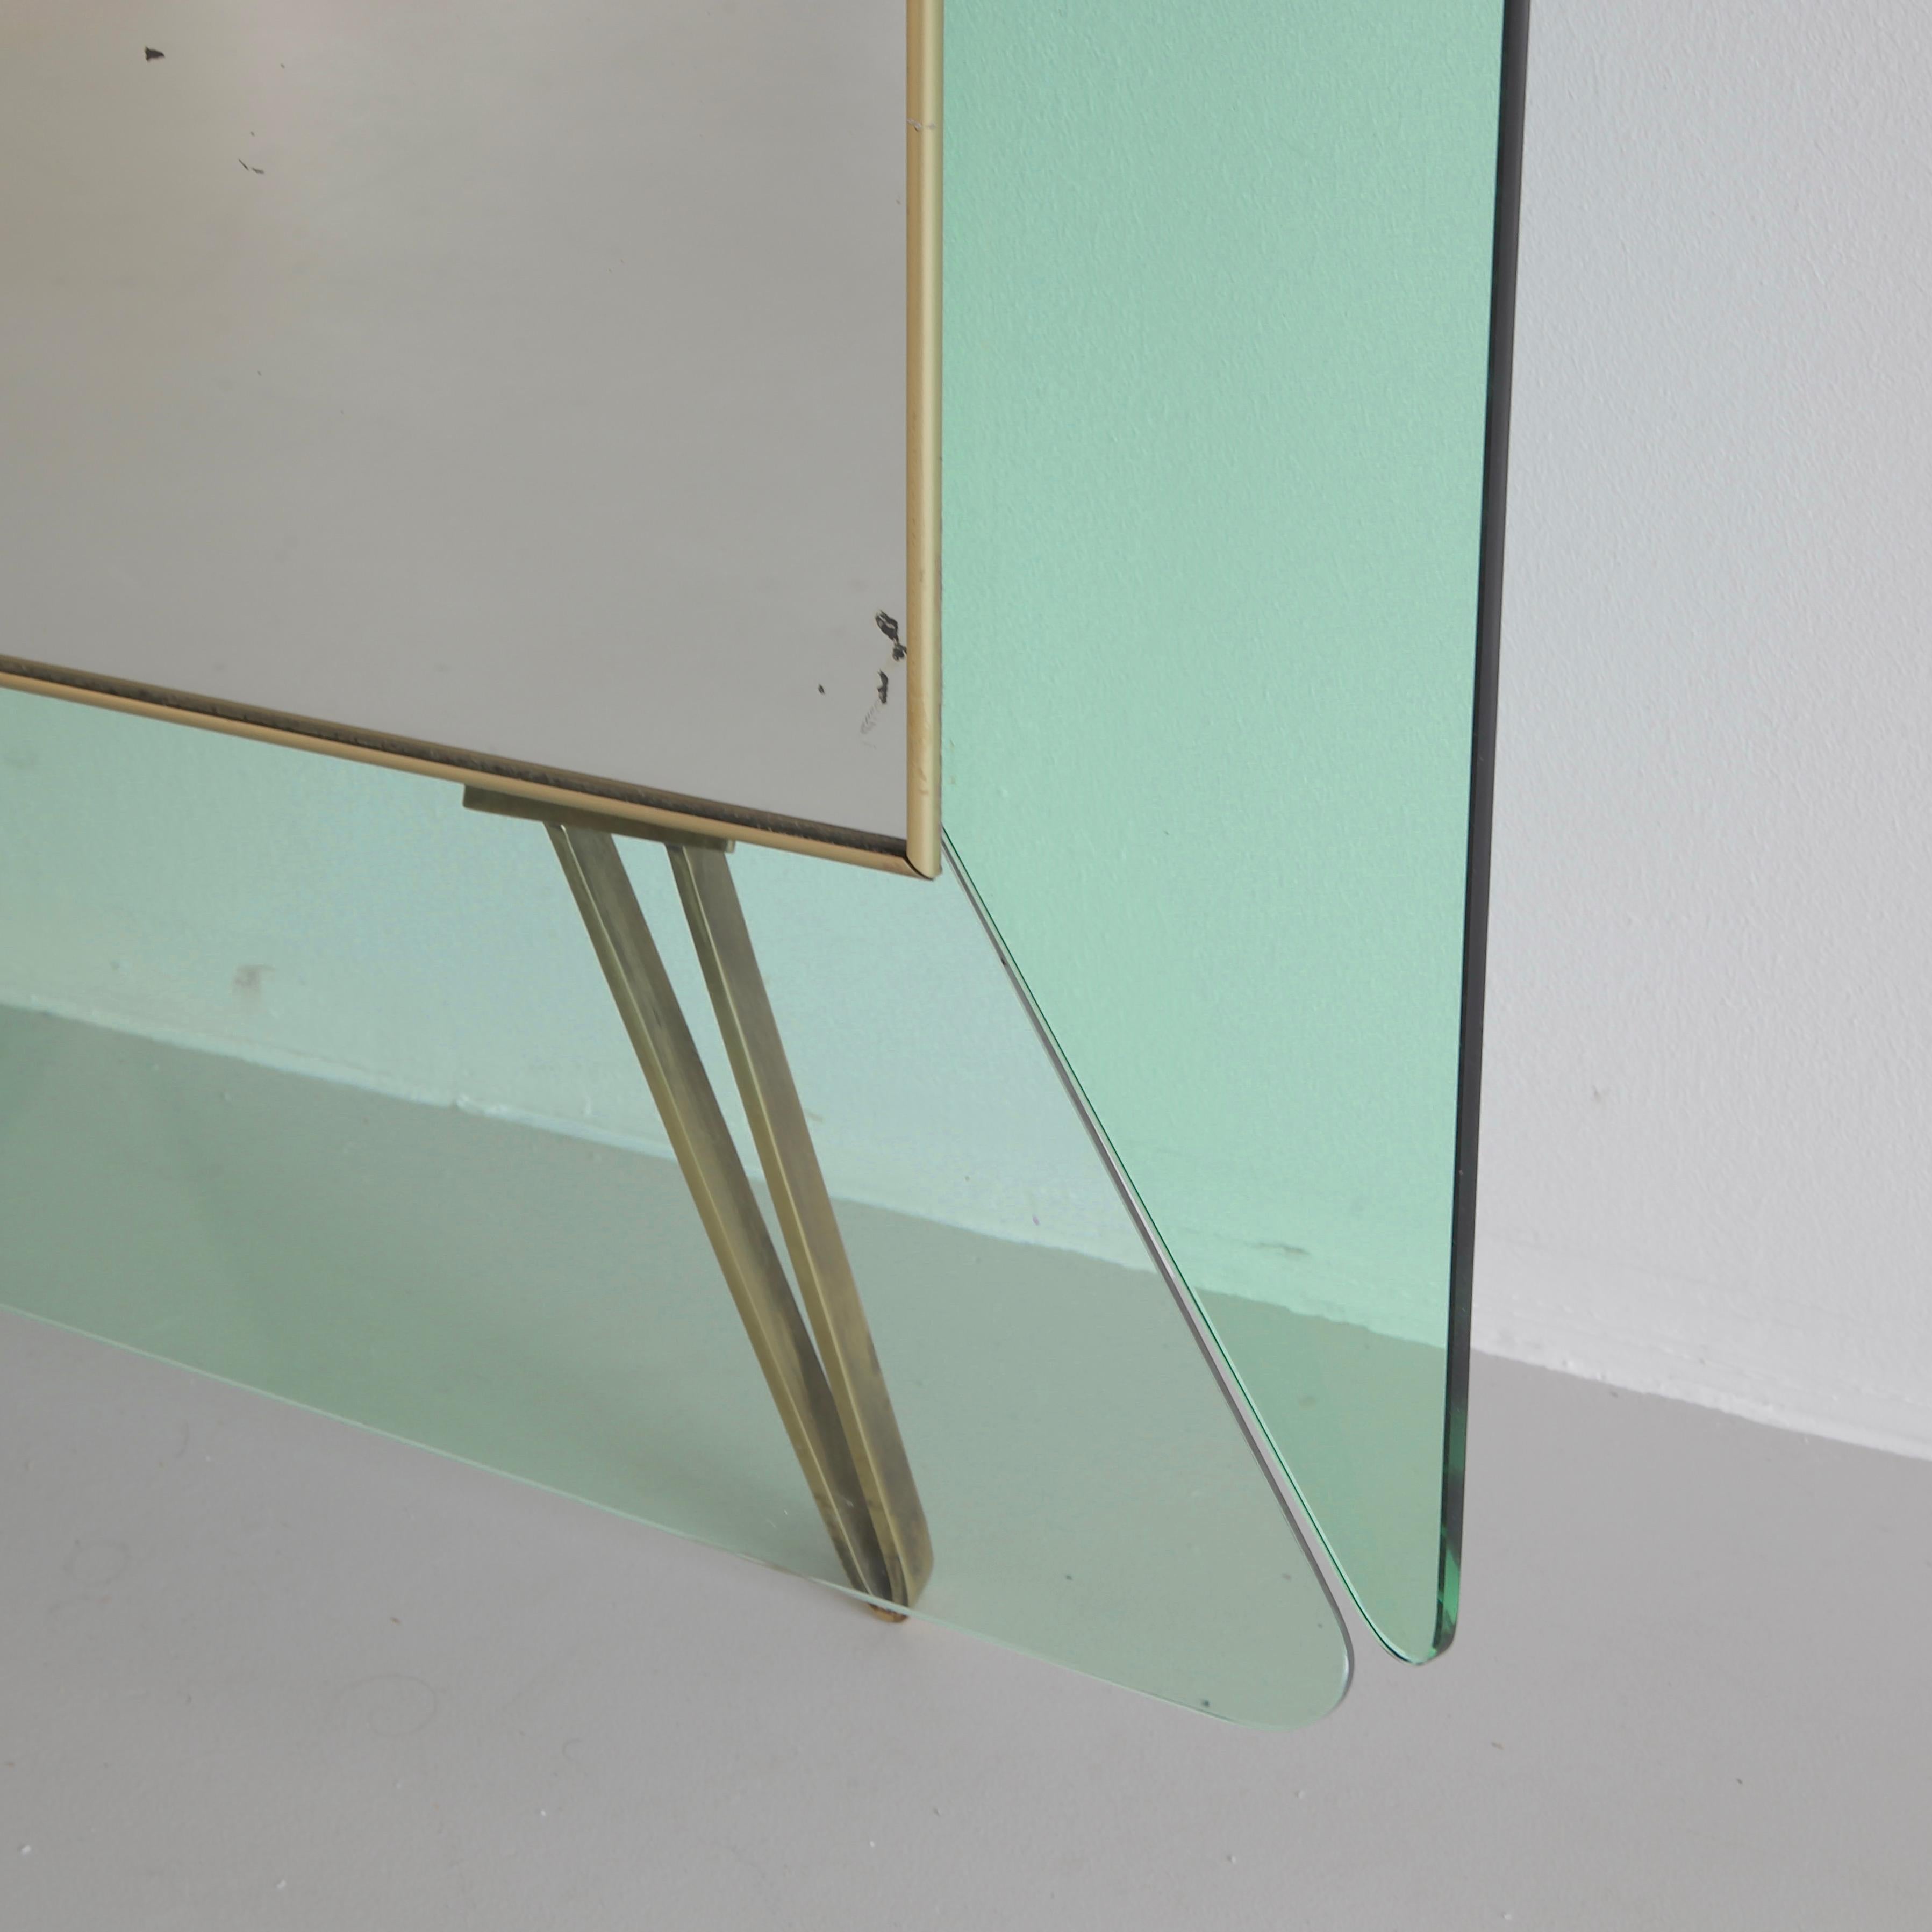 Floor mirror, framed with coloured glass. Italy, Cristal Arte, late 1950s/ early 1960s.

A large dimension floor mirror produced in Torino. The mirror is framed with six light green glass panels and offers a thick shaped glass console. The mirror